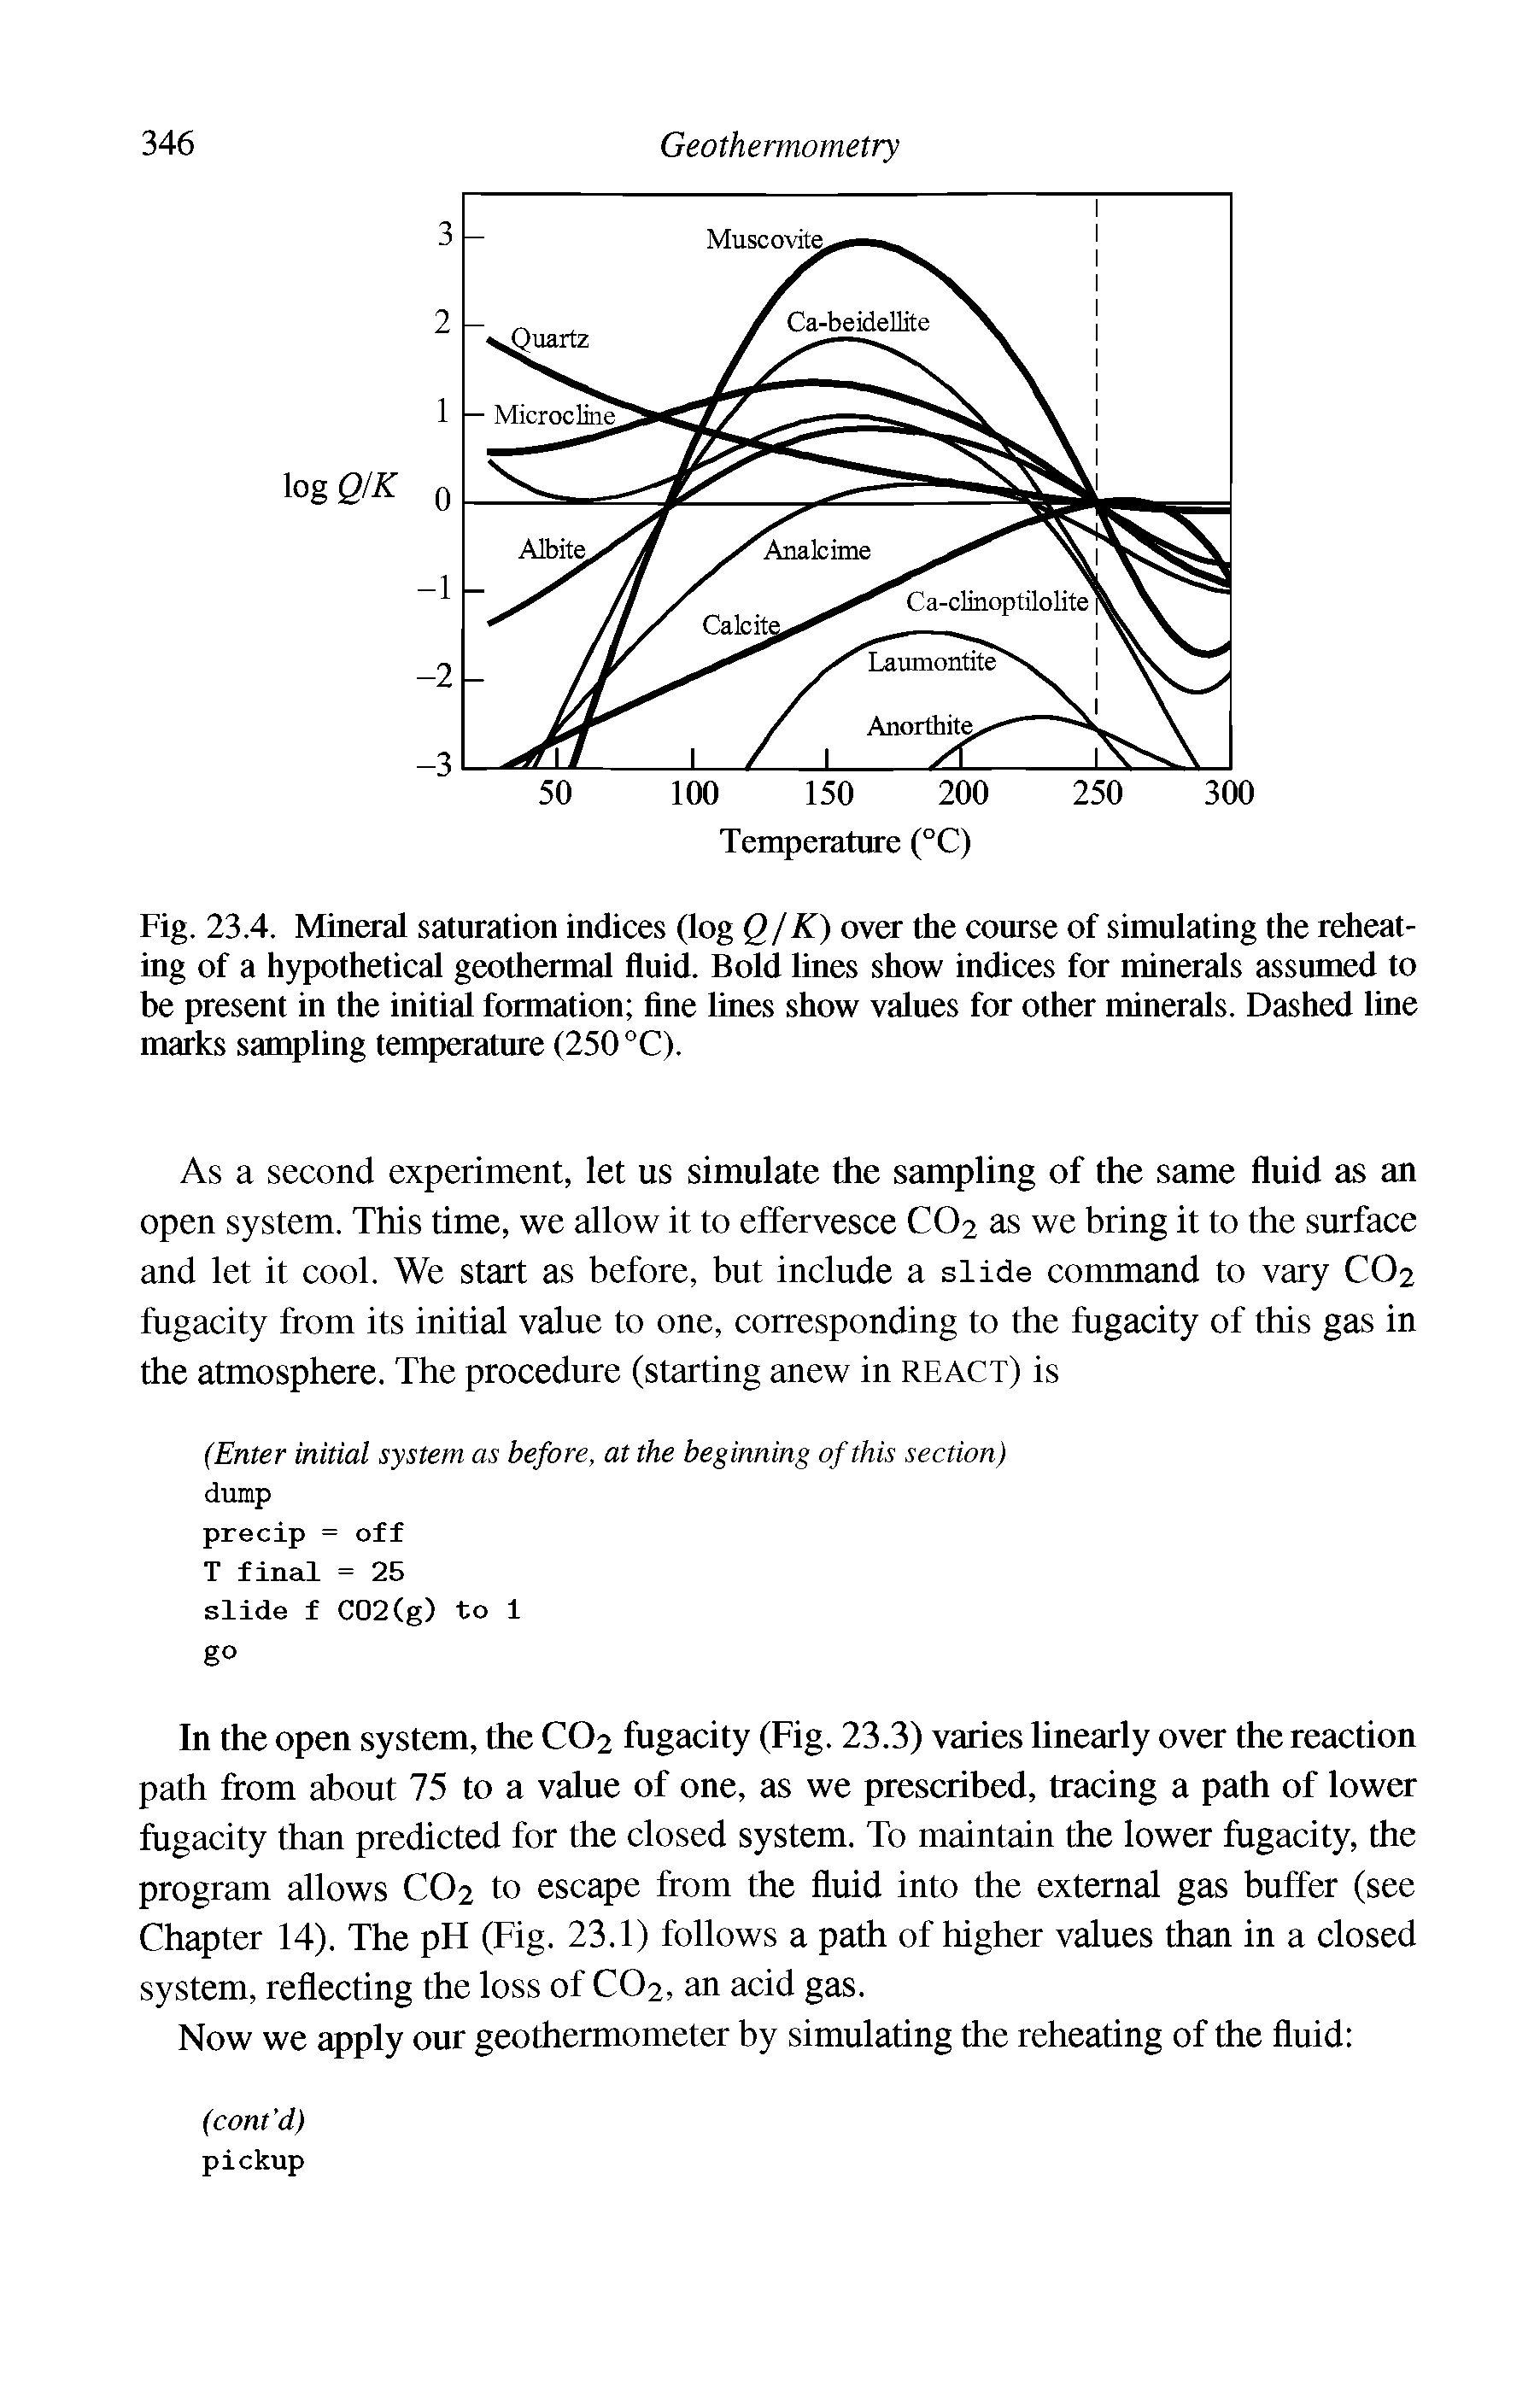 Fig. 23.4. Mineral saturation indices (log Q/K) over the course of simulating the reheating of a hypothetical geothermal fluid. Bold lines show indices for minerals assumed to be present in the initial formation fine lines show values for other minerals. Dashed line marks sampling temperature (250 °C).